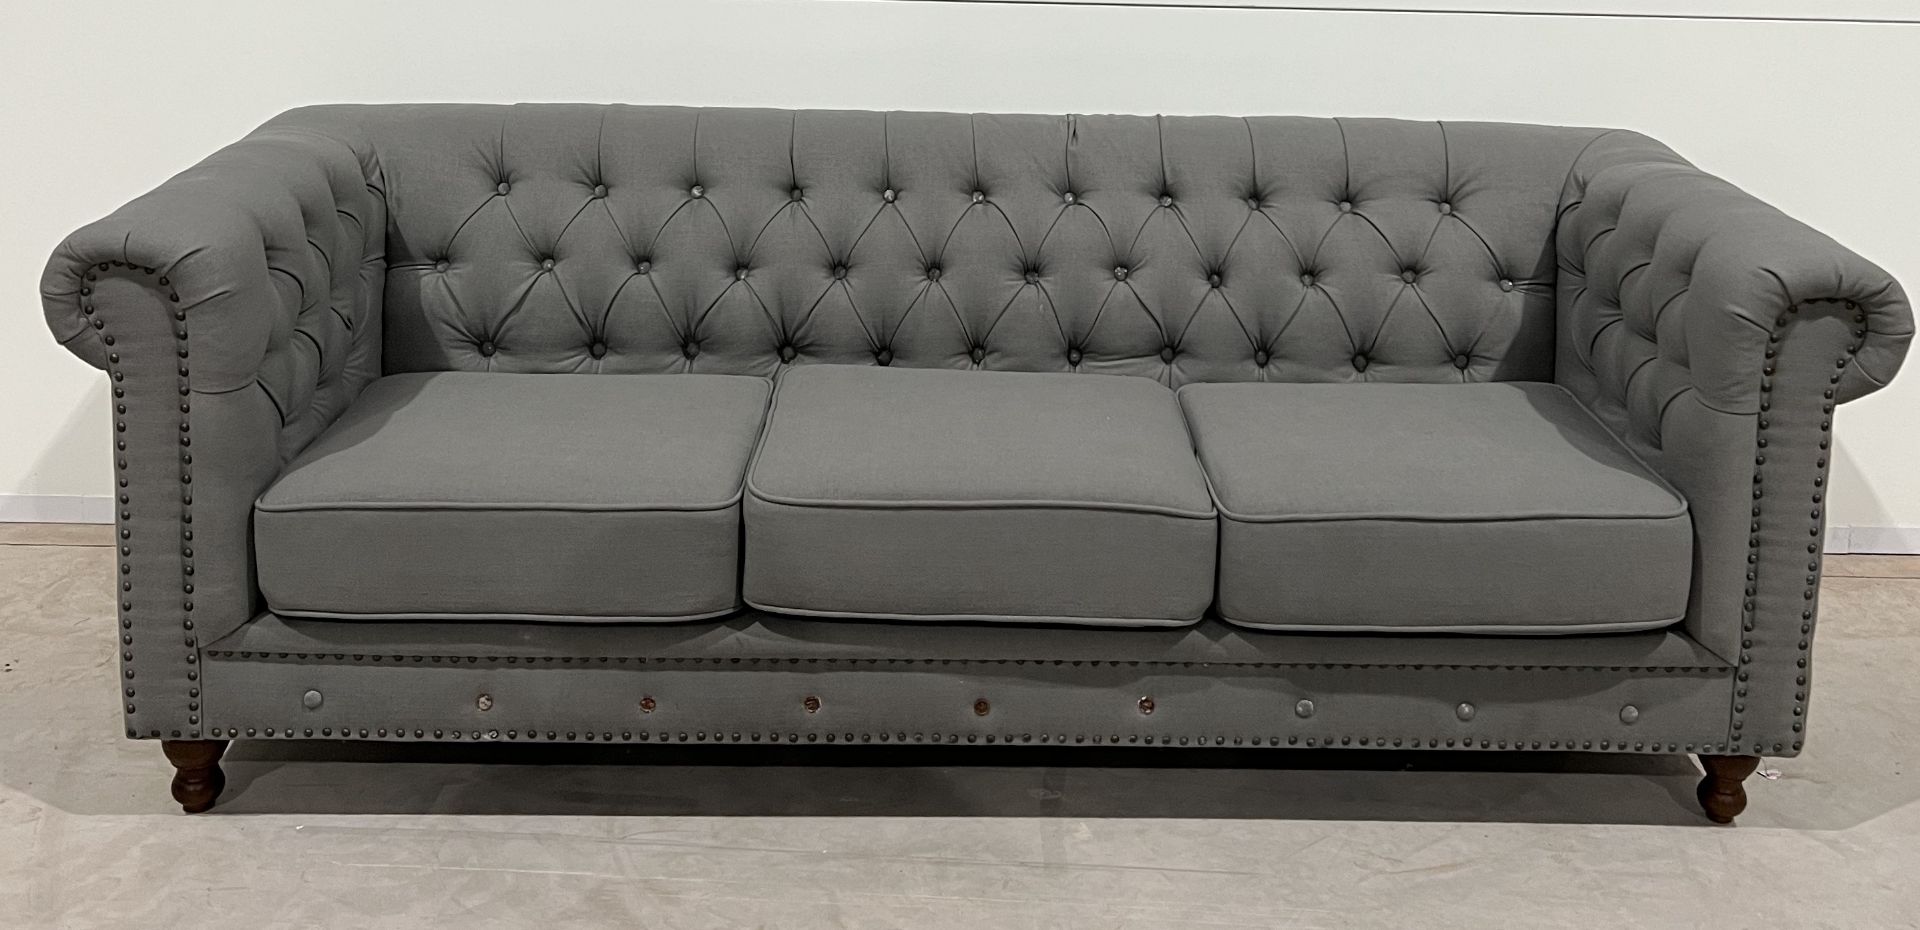 Milano Chesterfield Grey Plush Fabric Three Seater Sofa Exudes Modern Luxury With Raditional - Image 2 of 2